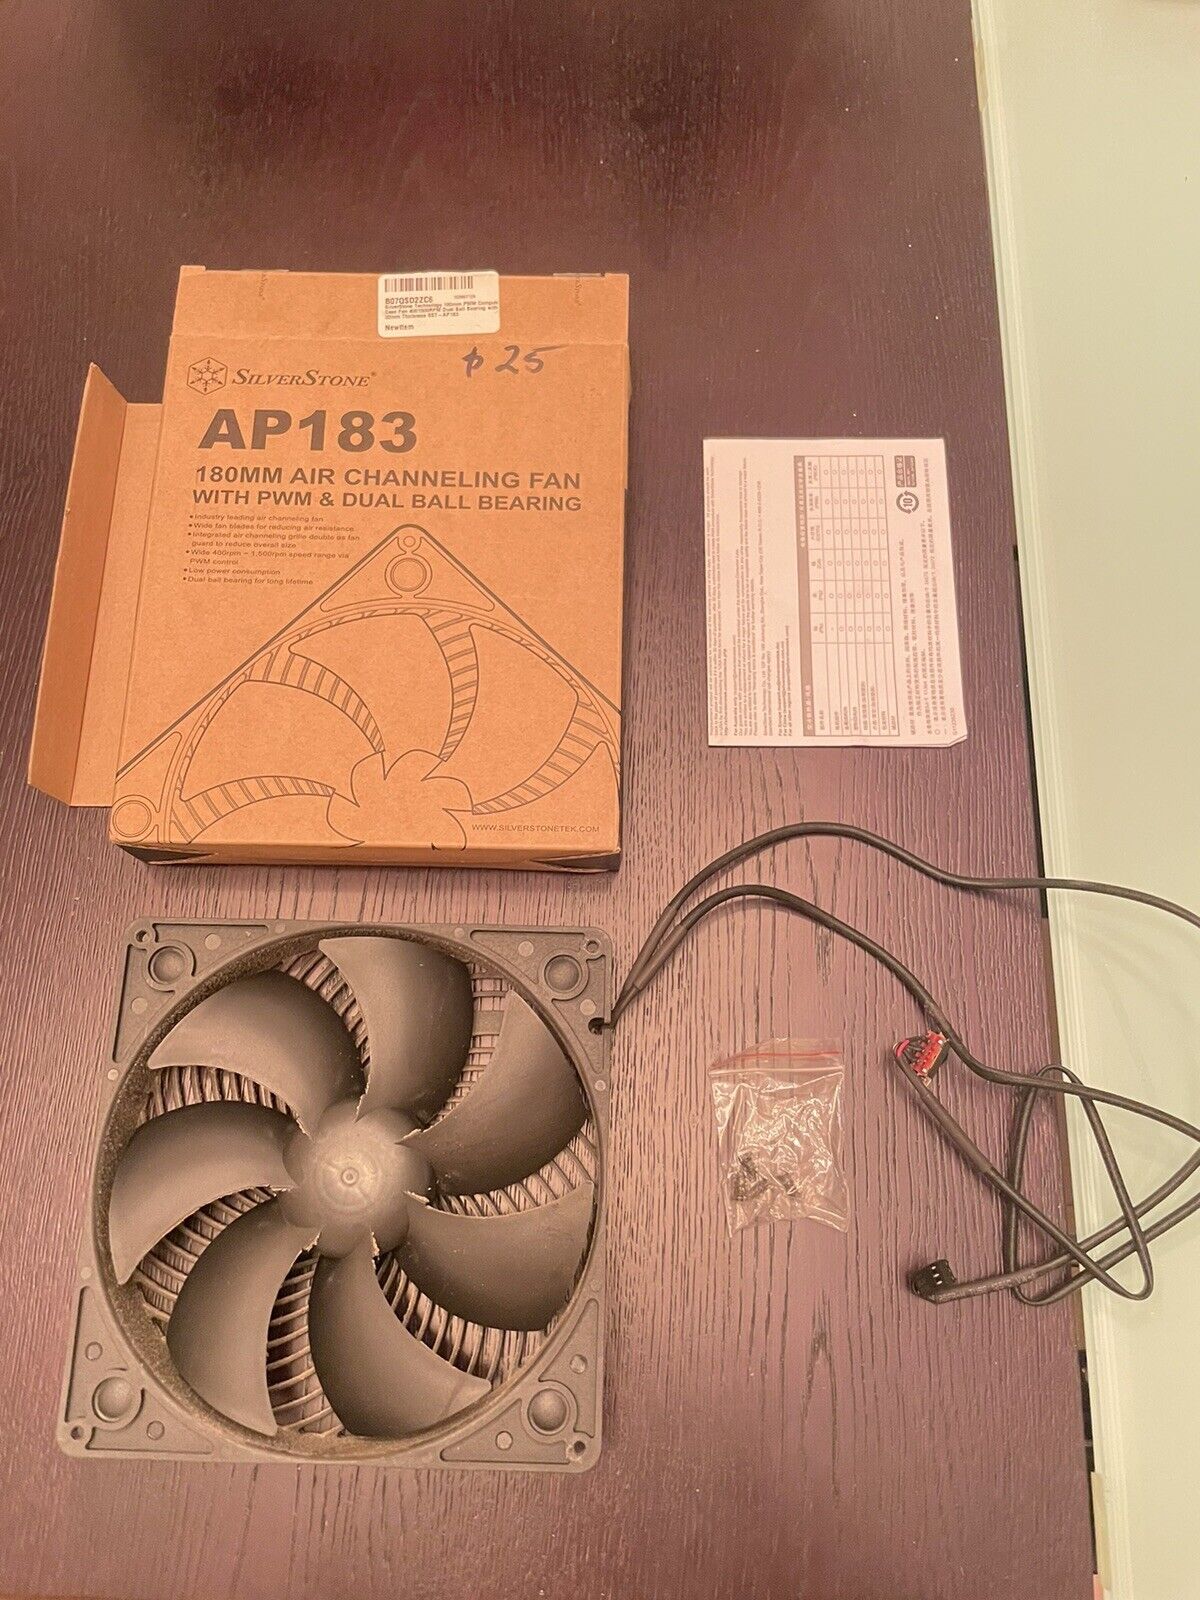 SILVERSTONE AP183 180MM AIR CHANNELING FAN WITH PWM & DUAL BALL BEARING - NEW